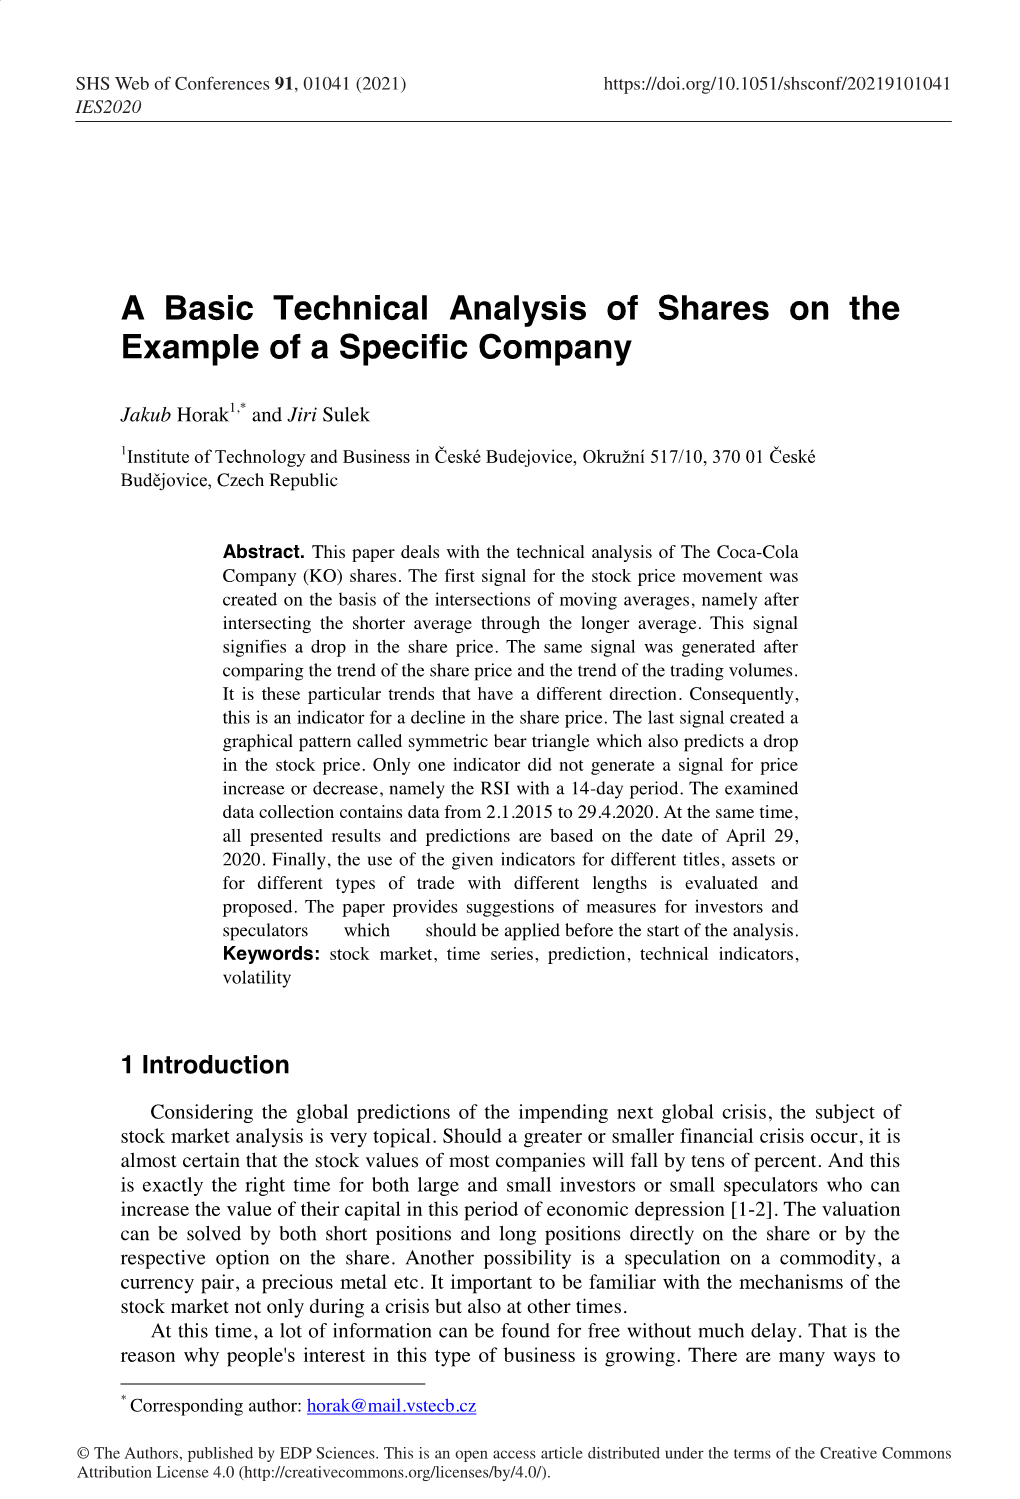 A Basic Technical Analysis of Shares on the Example of a Specific Company